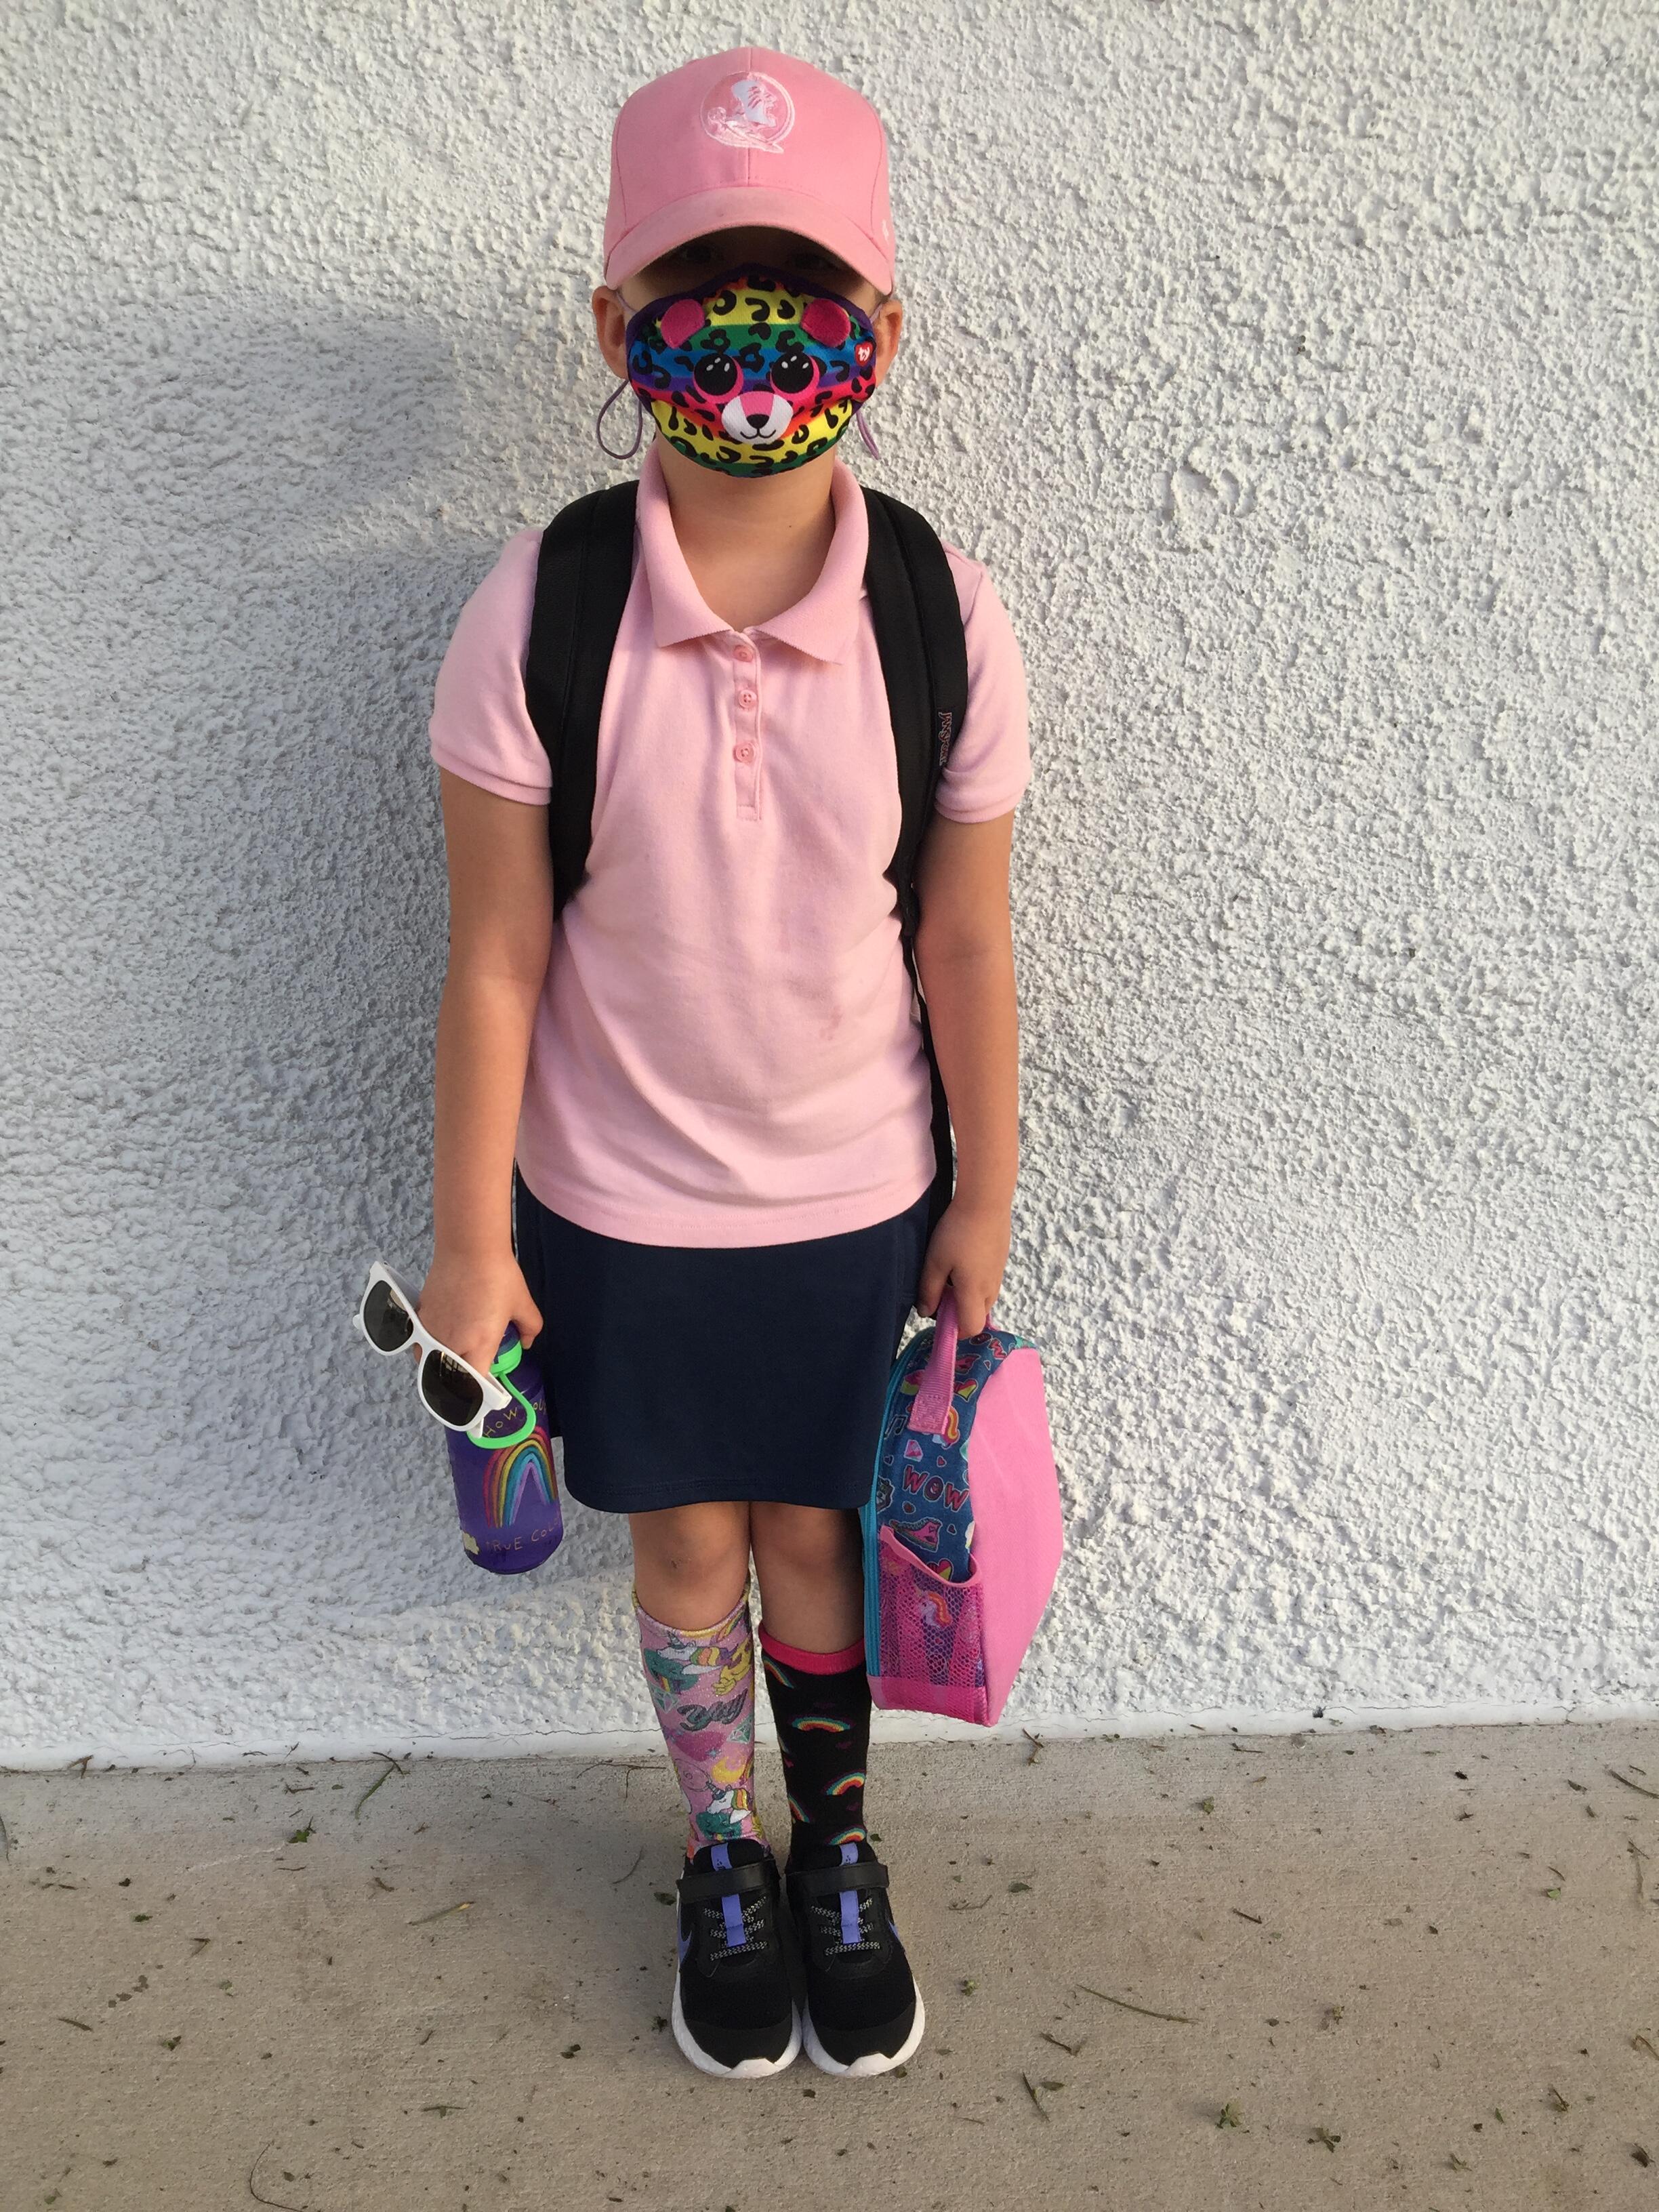 student wearing crazy hat and socks 